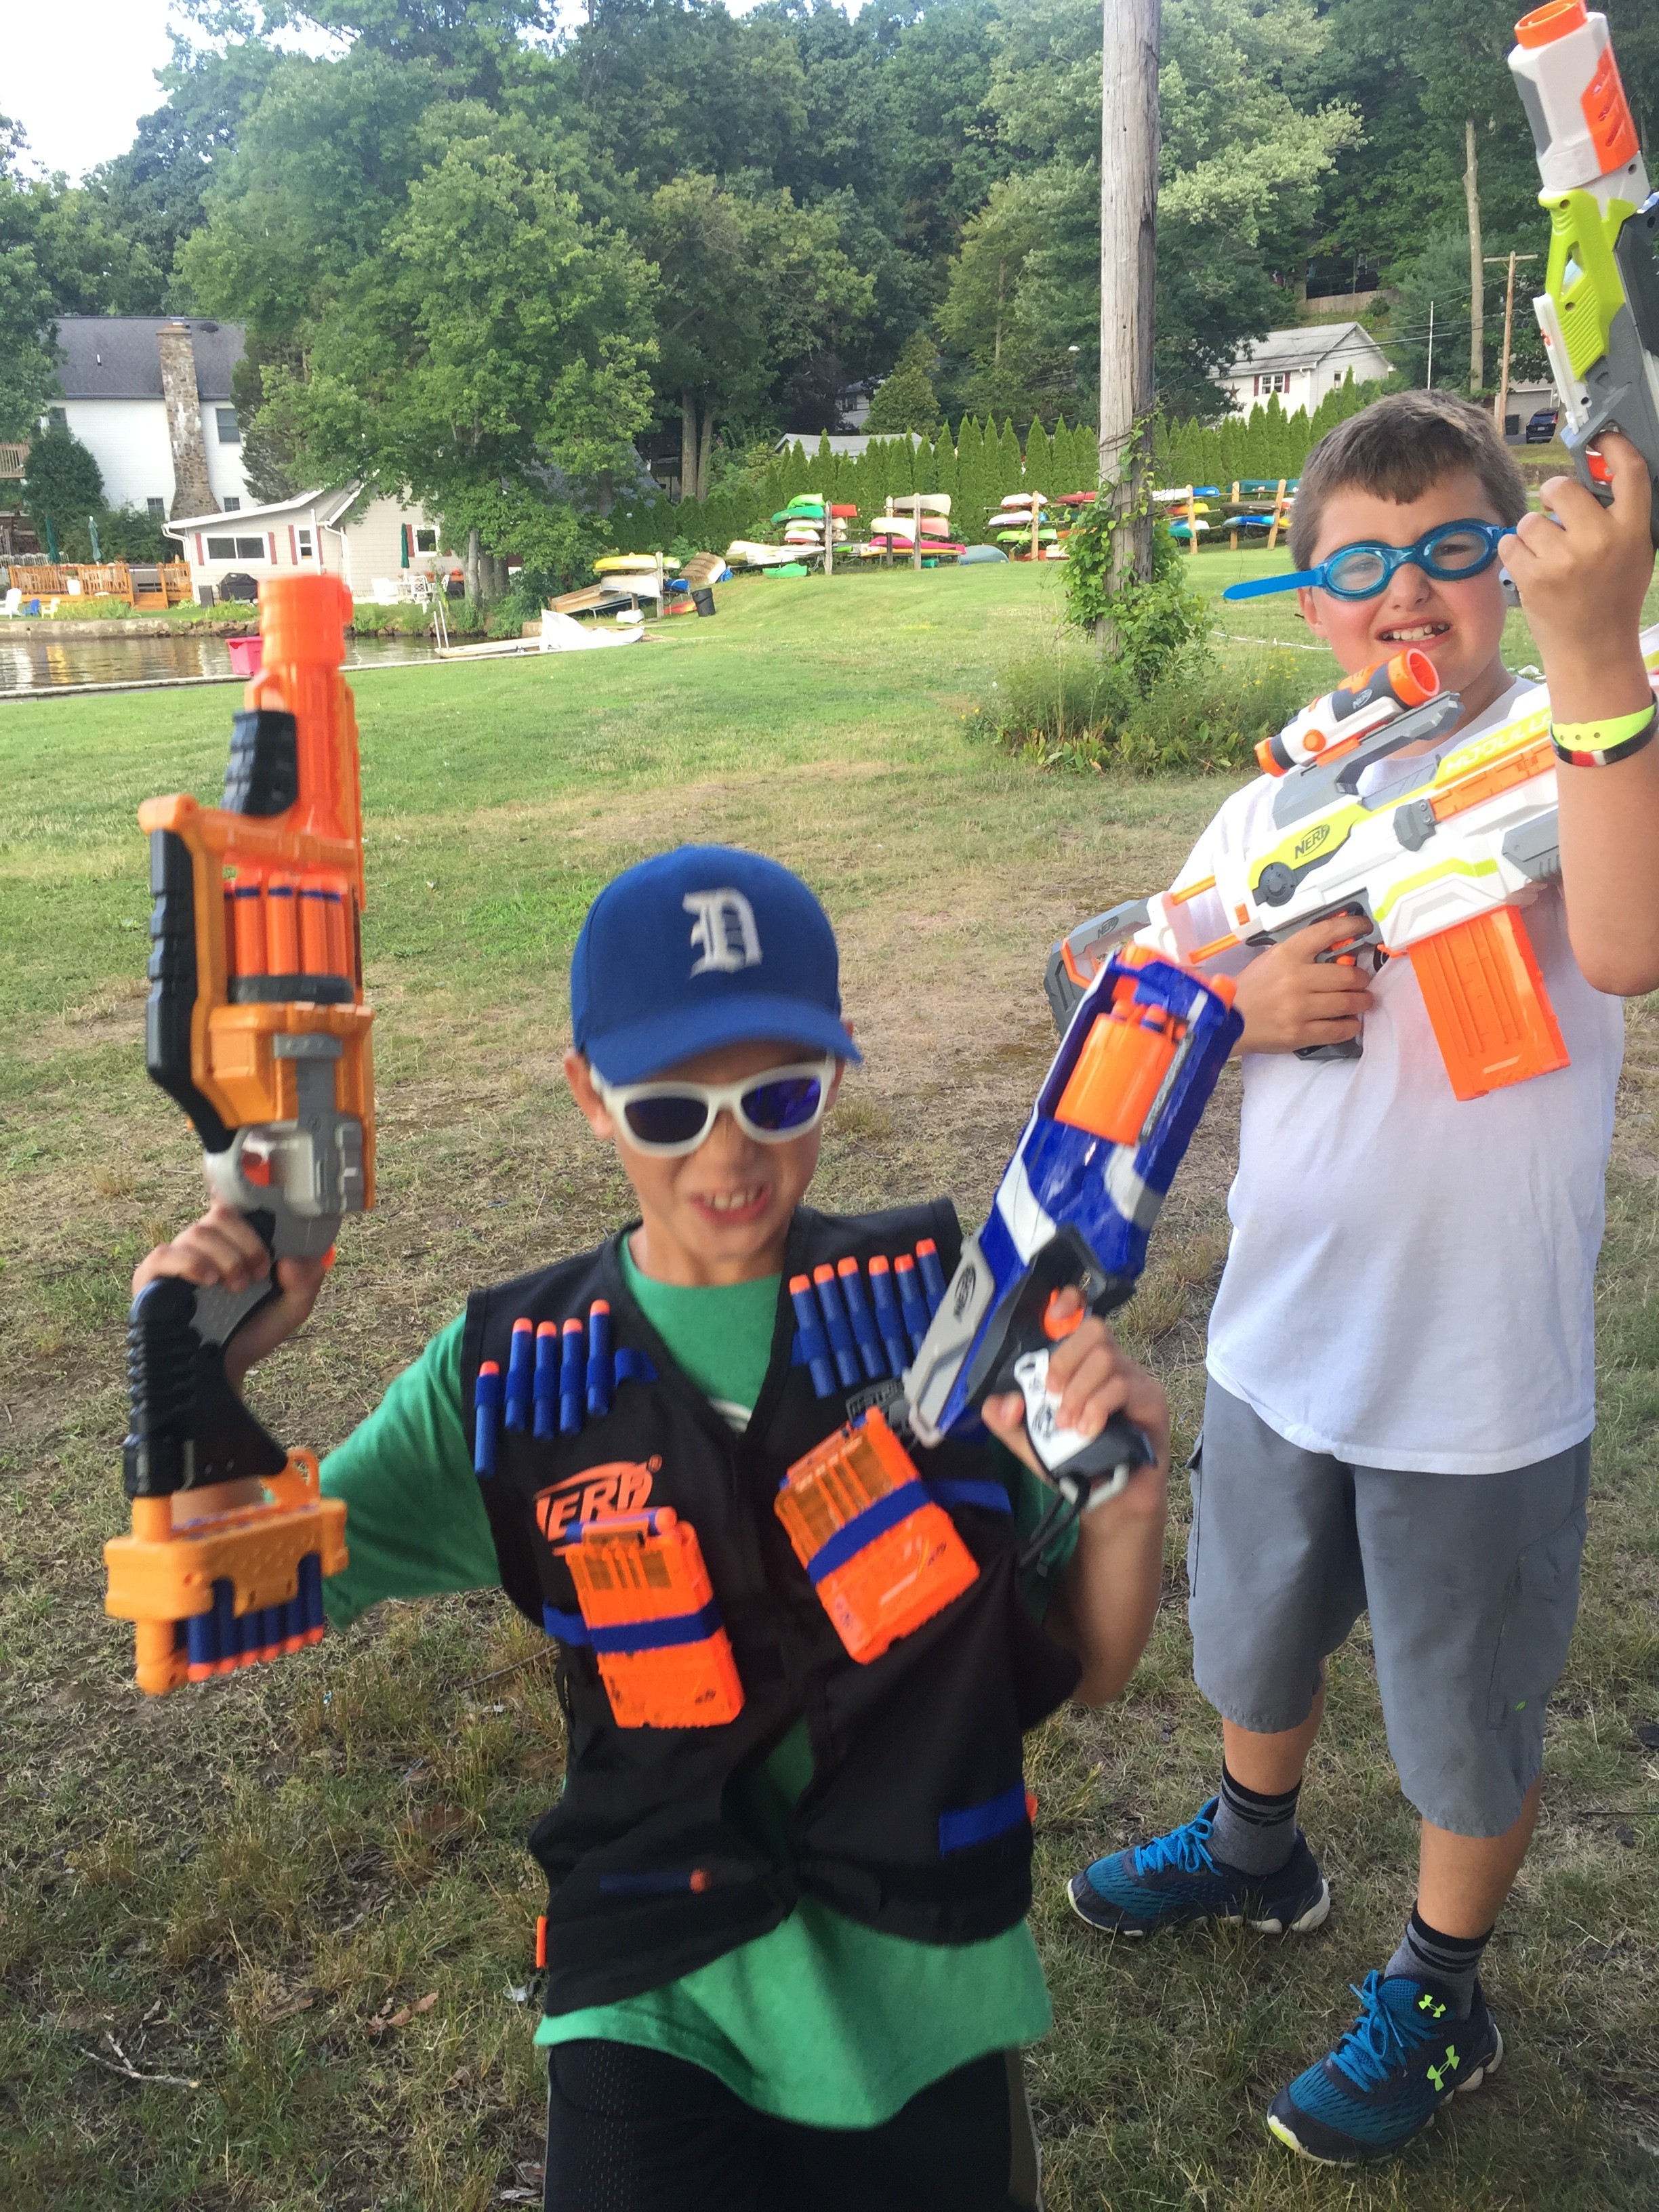 The Summer of Nerf